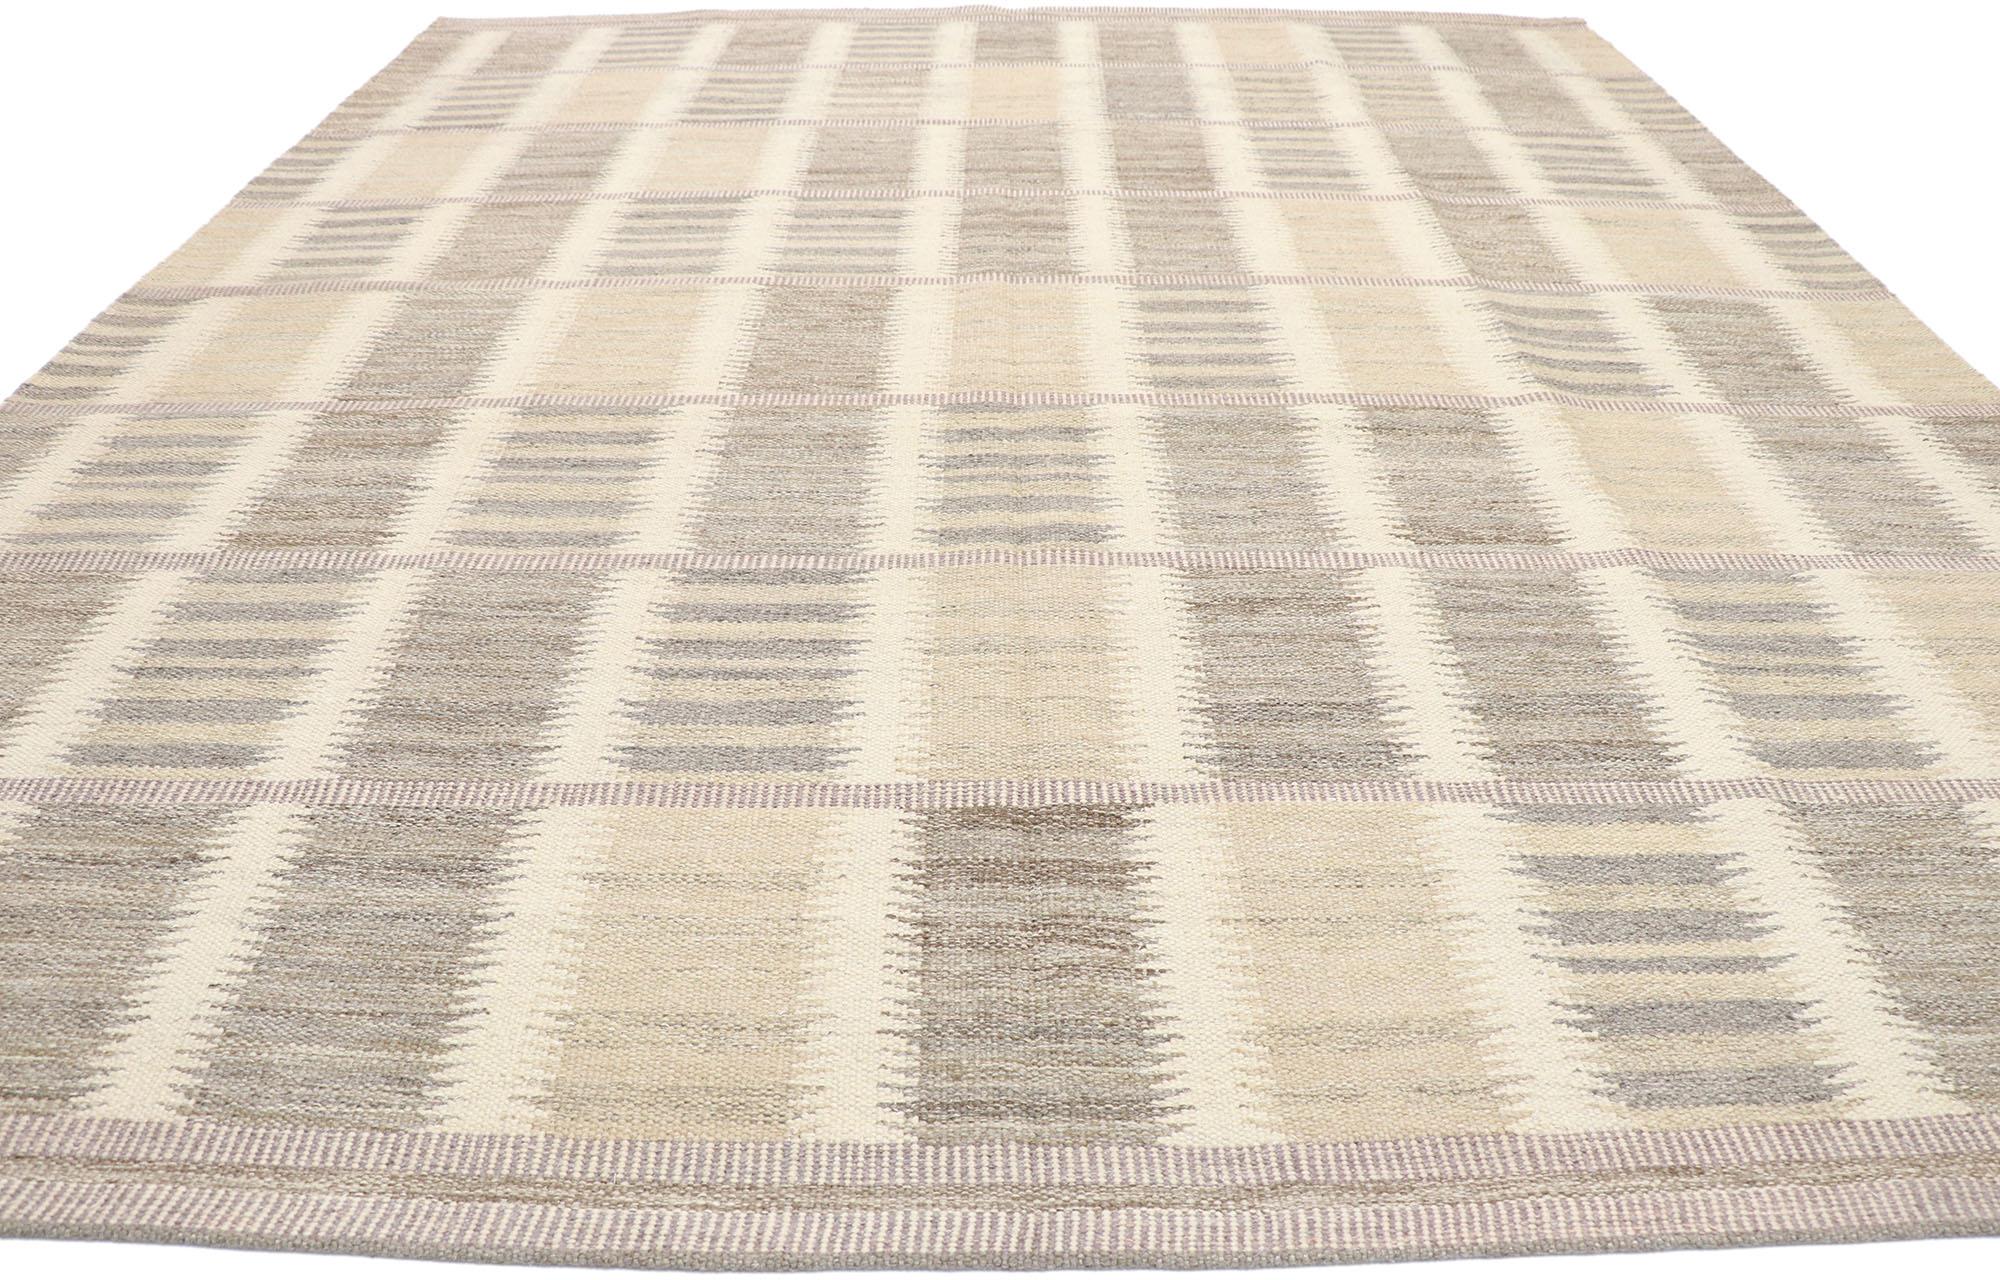 Indian New Contemporary Swedish Inspired Kilim Rug with Scandinavian Modern Style